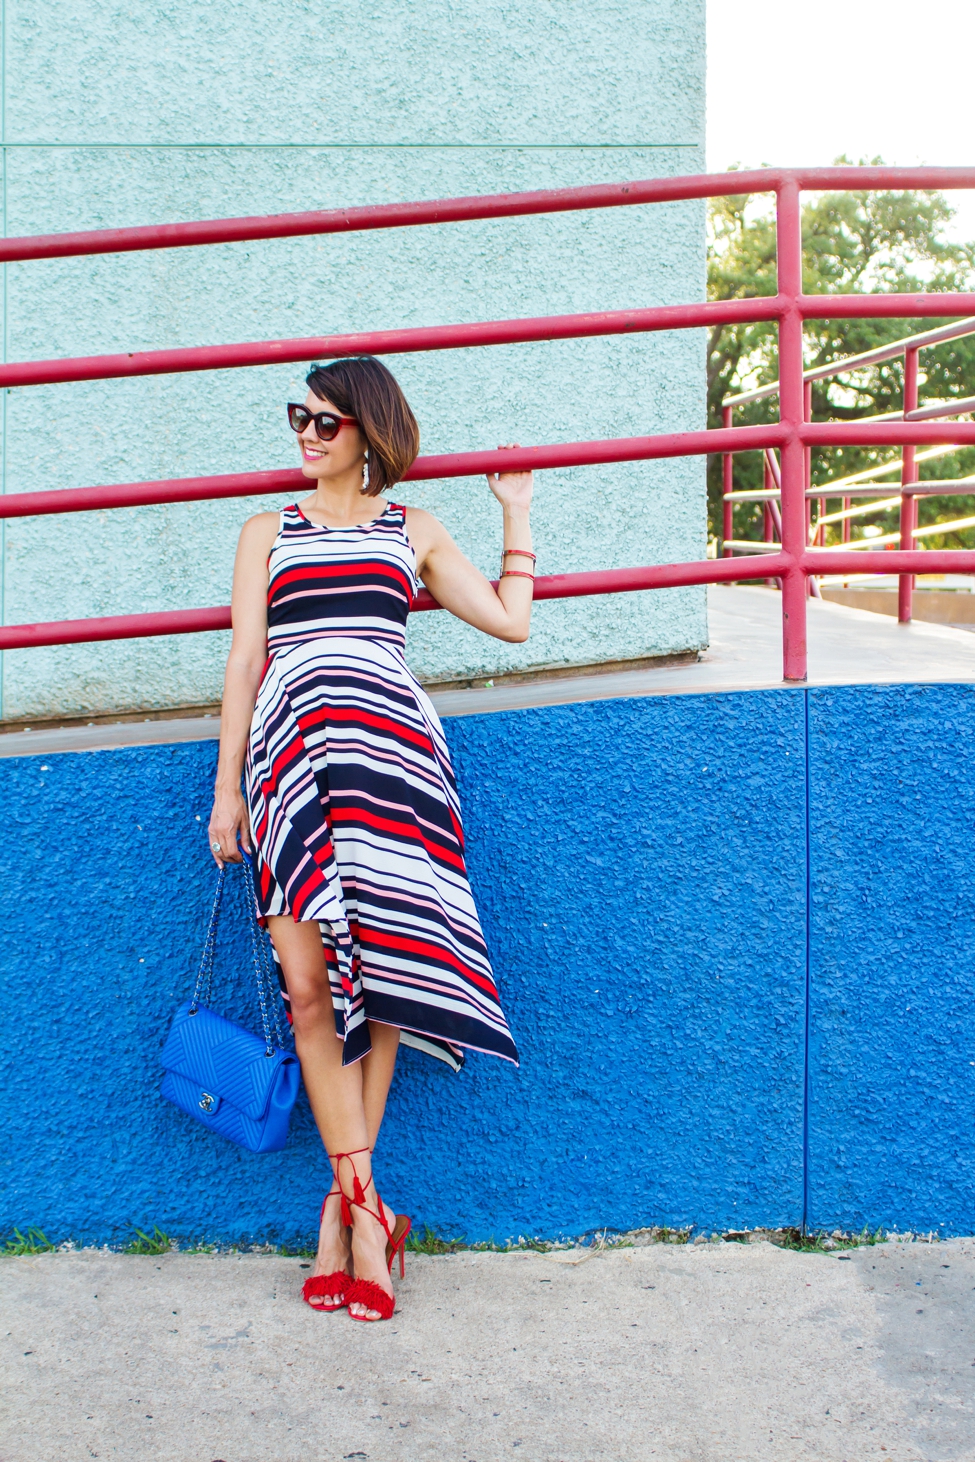 Wear Where Well ModCloth Workwear Red White Blue dress_0020